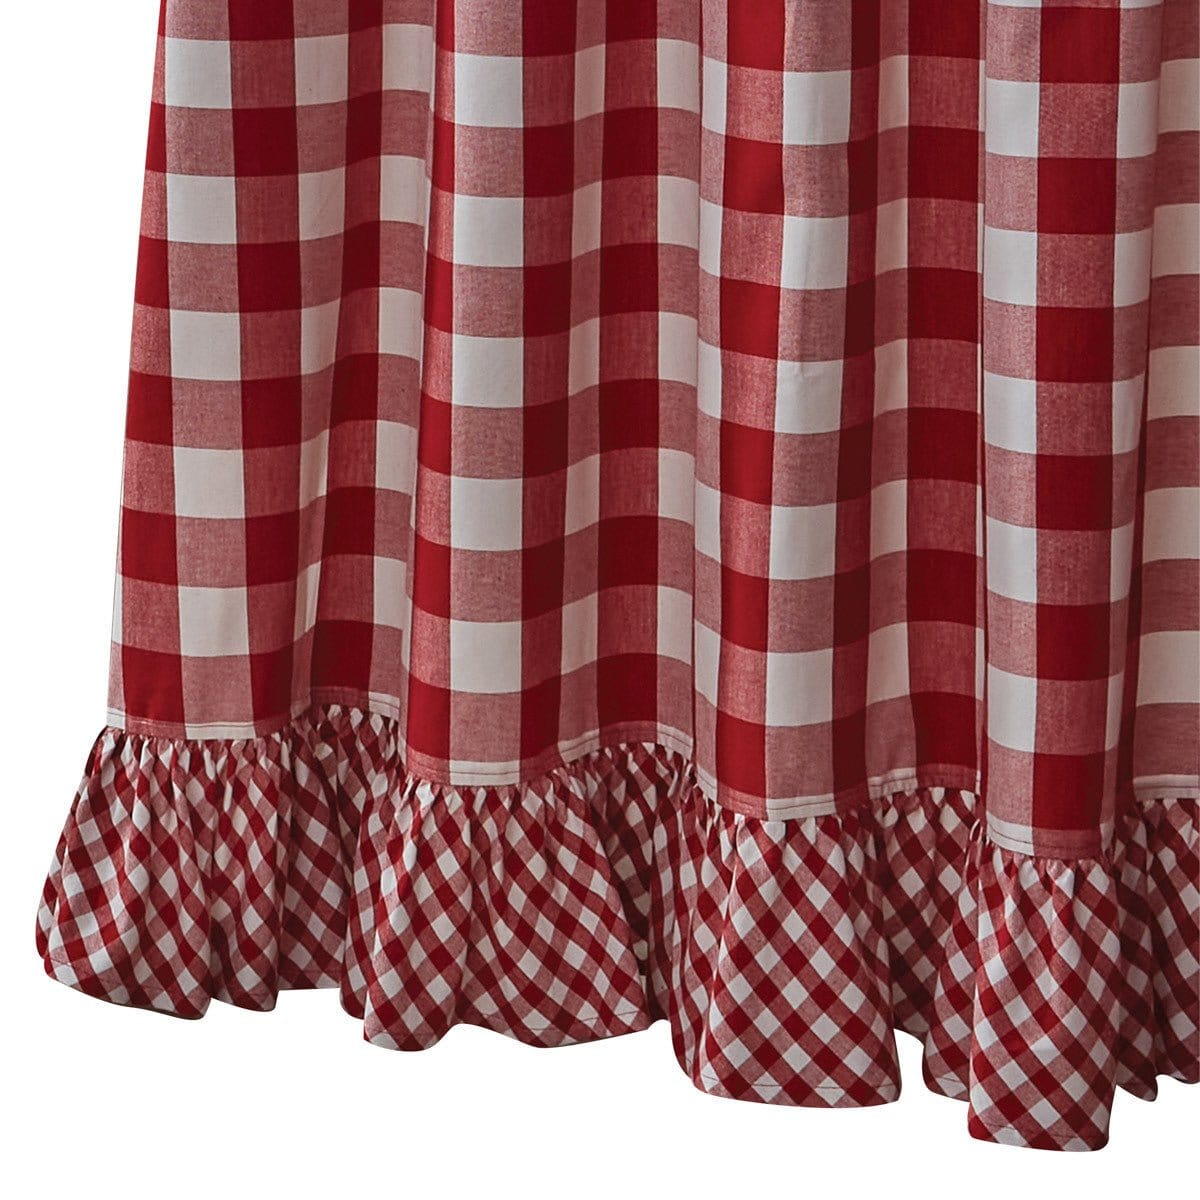 Wicklow Check in Red Shower Curtain-Park Designs-The Village Merchant